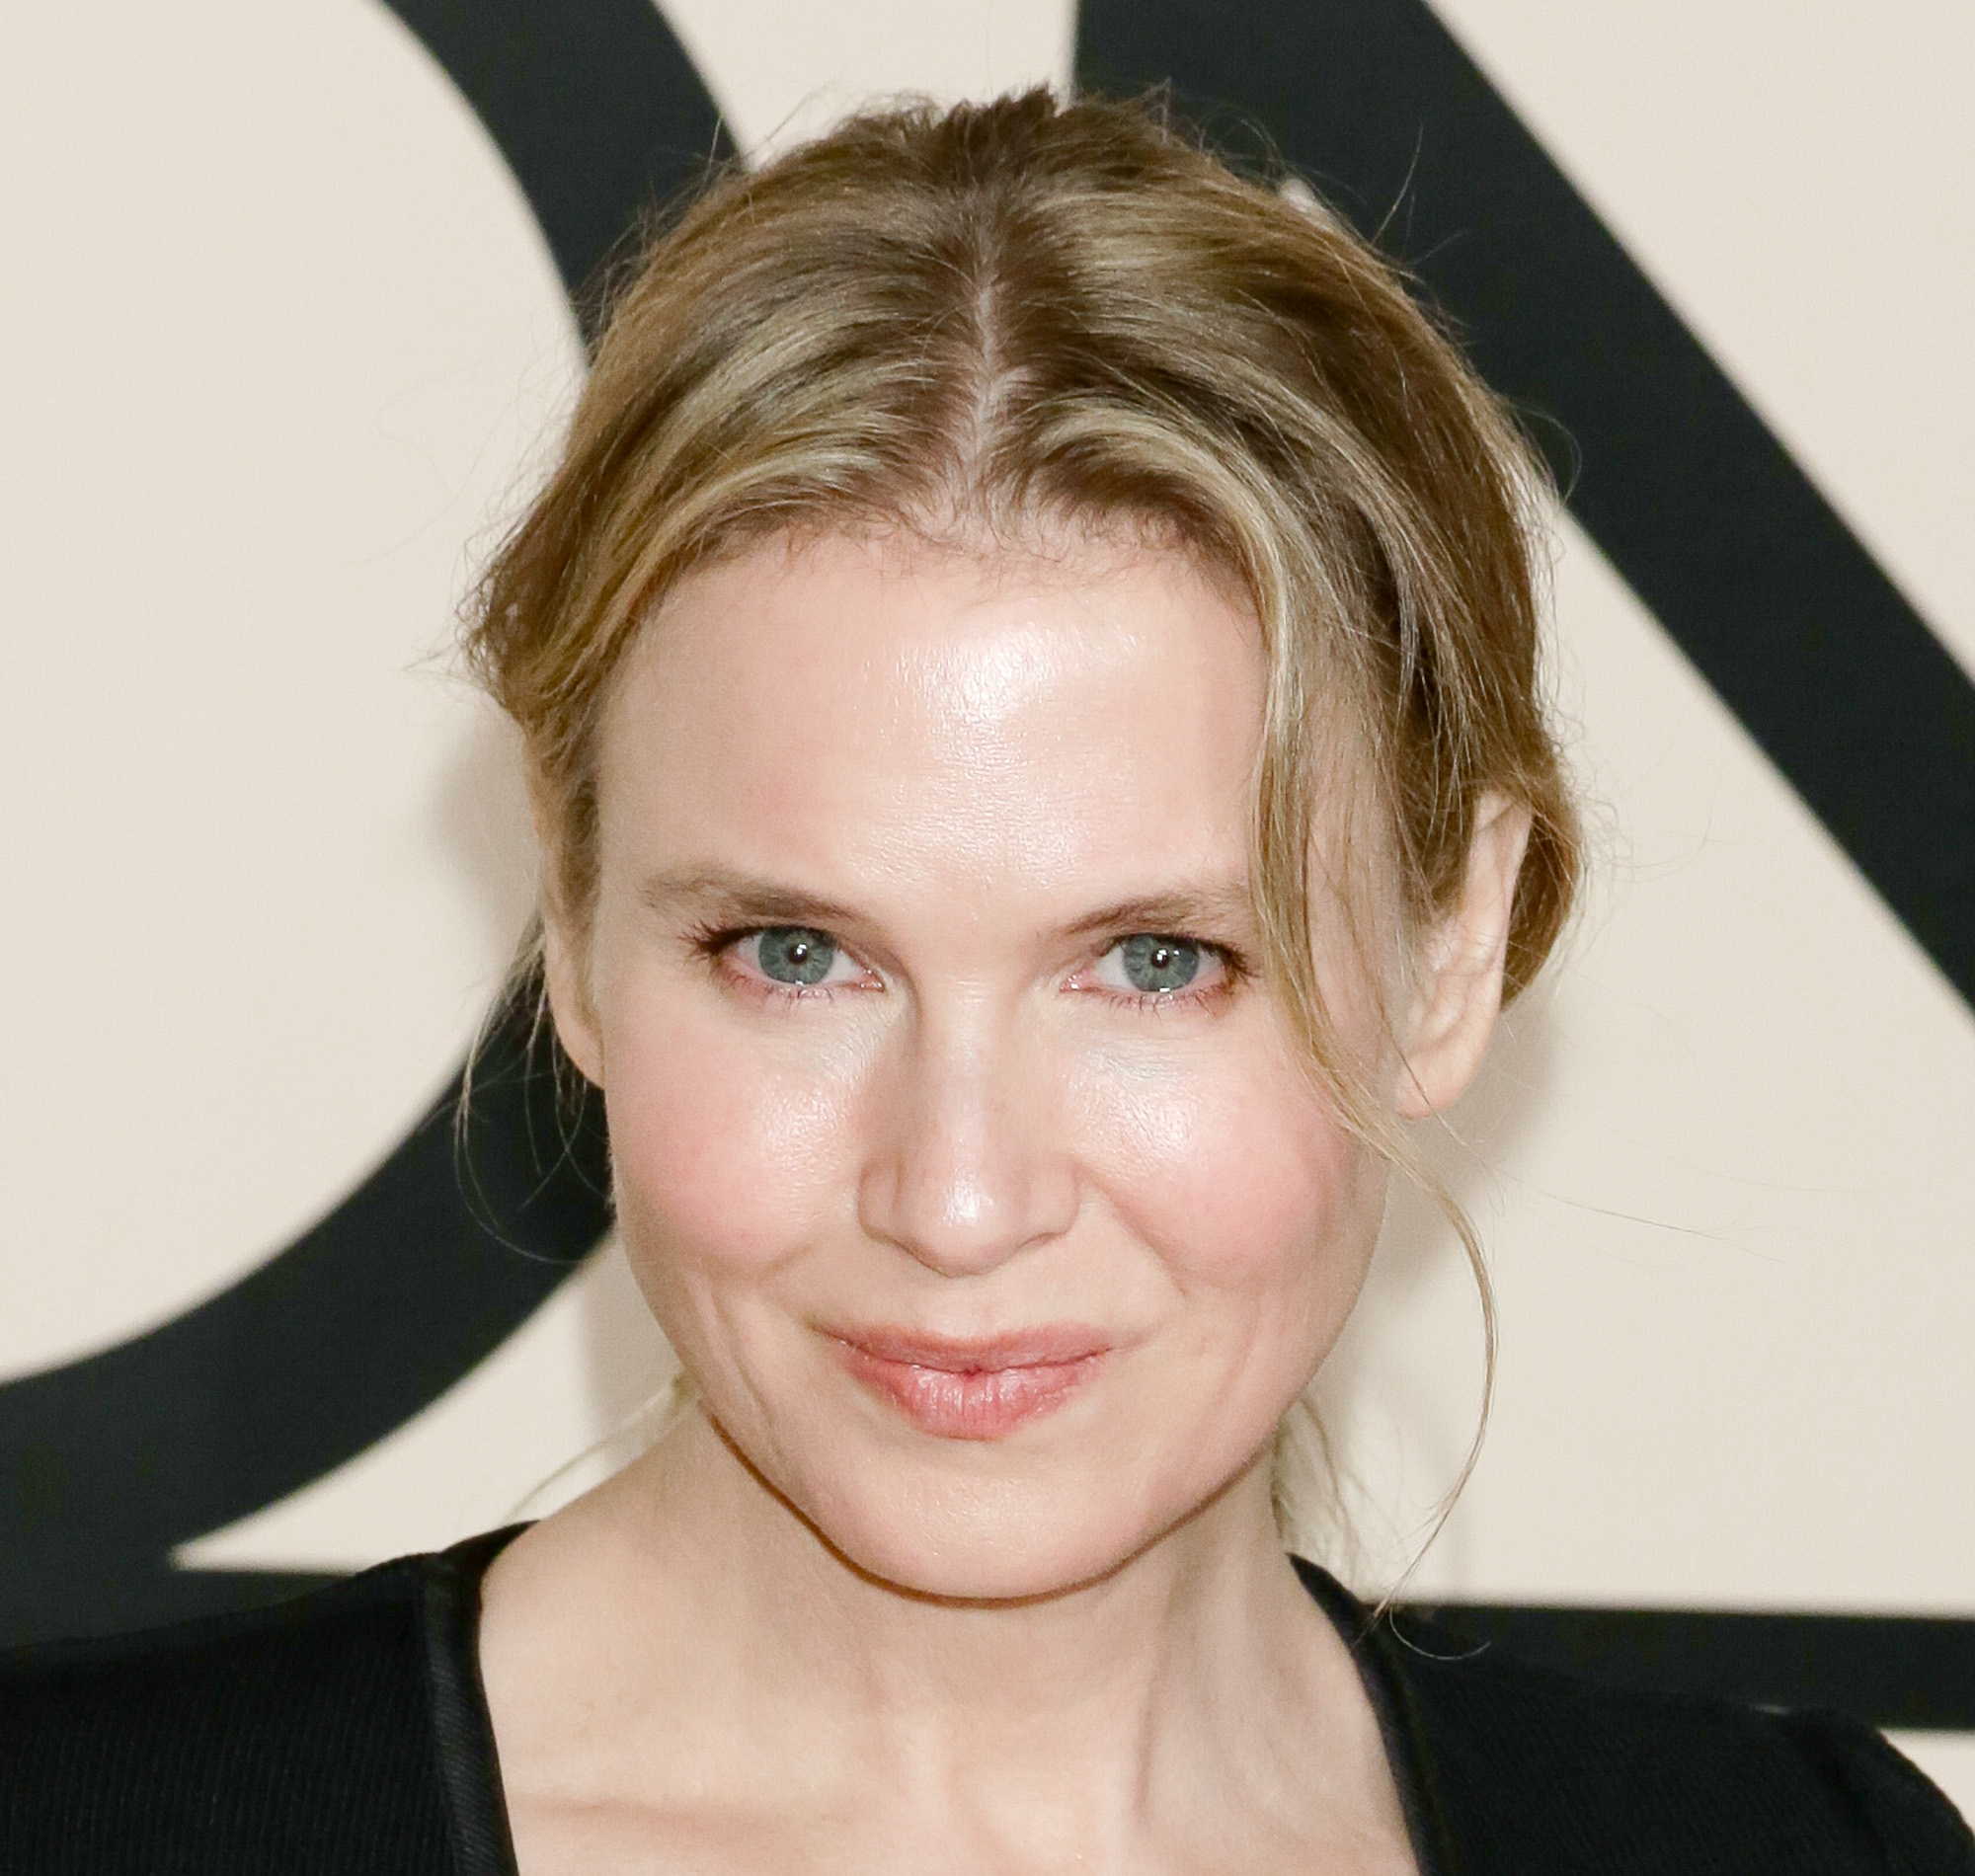 Renee Zellweger Facelift Plastic Surgery Before and After | Celebie